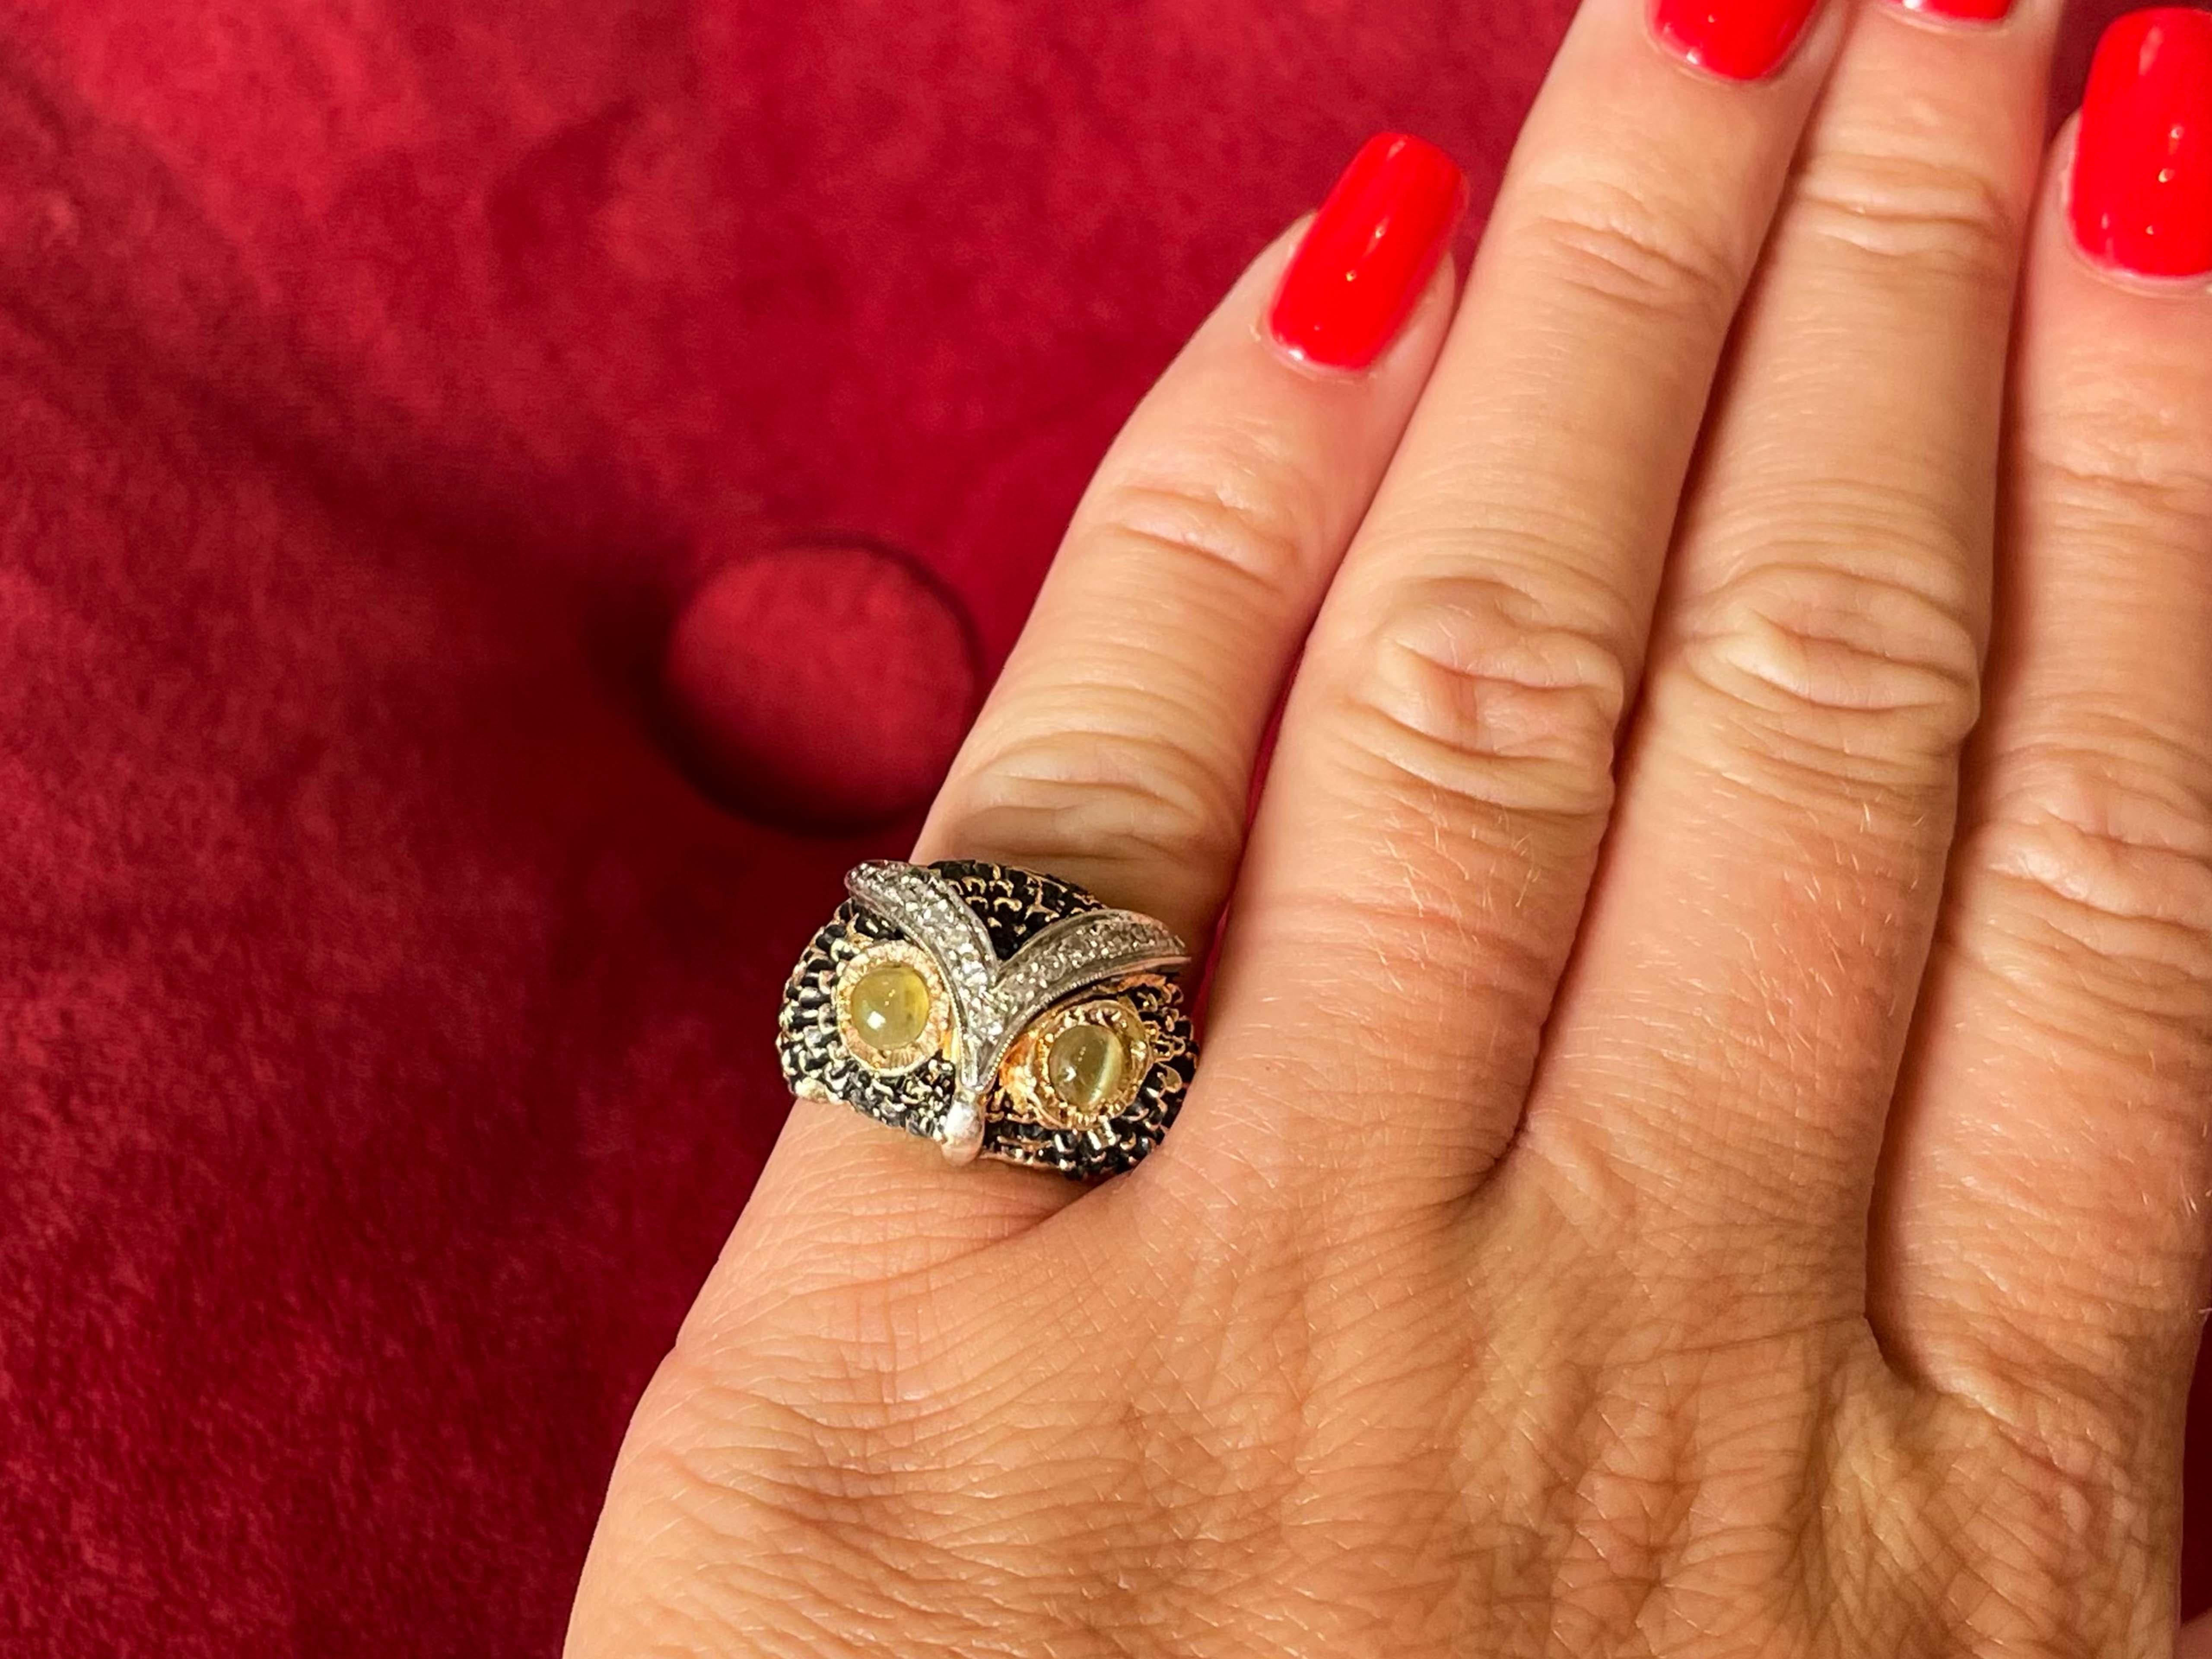 Item Specifications:

Metal: 14K Yellow Gold

Total Weight: 11.7 Grams

Ring Size: 5.5

Diamond Count: 15 single cut diamonds

Diamond Carat Weight: ~0.15 Carats

Diamond Color: G-H

Diamond Clarity: VS2-SI1
​
​Gemstone: 2 Cats Eye